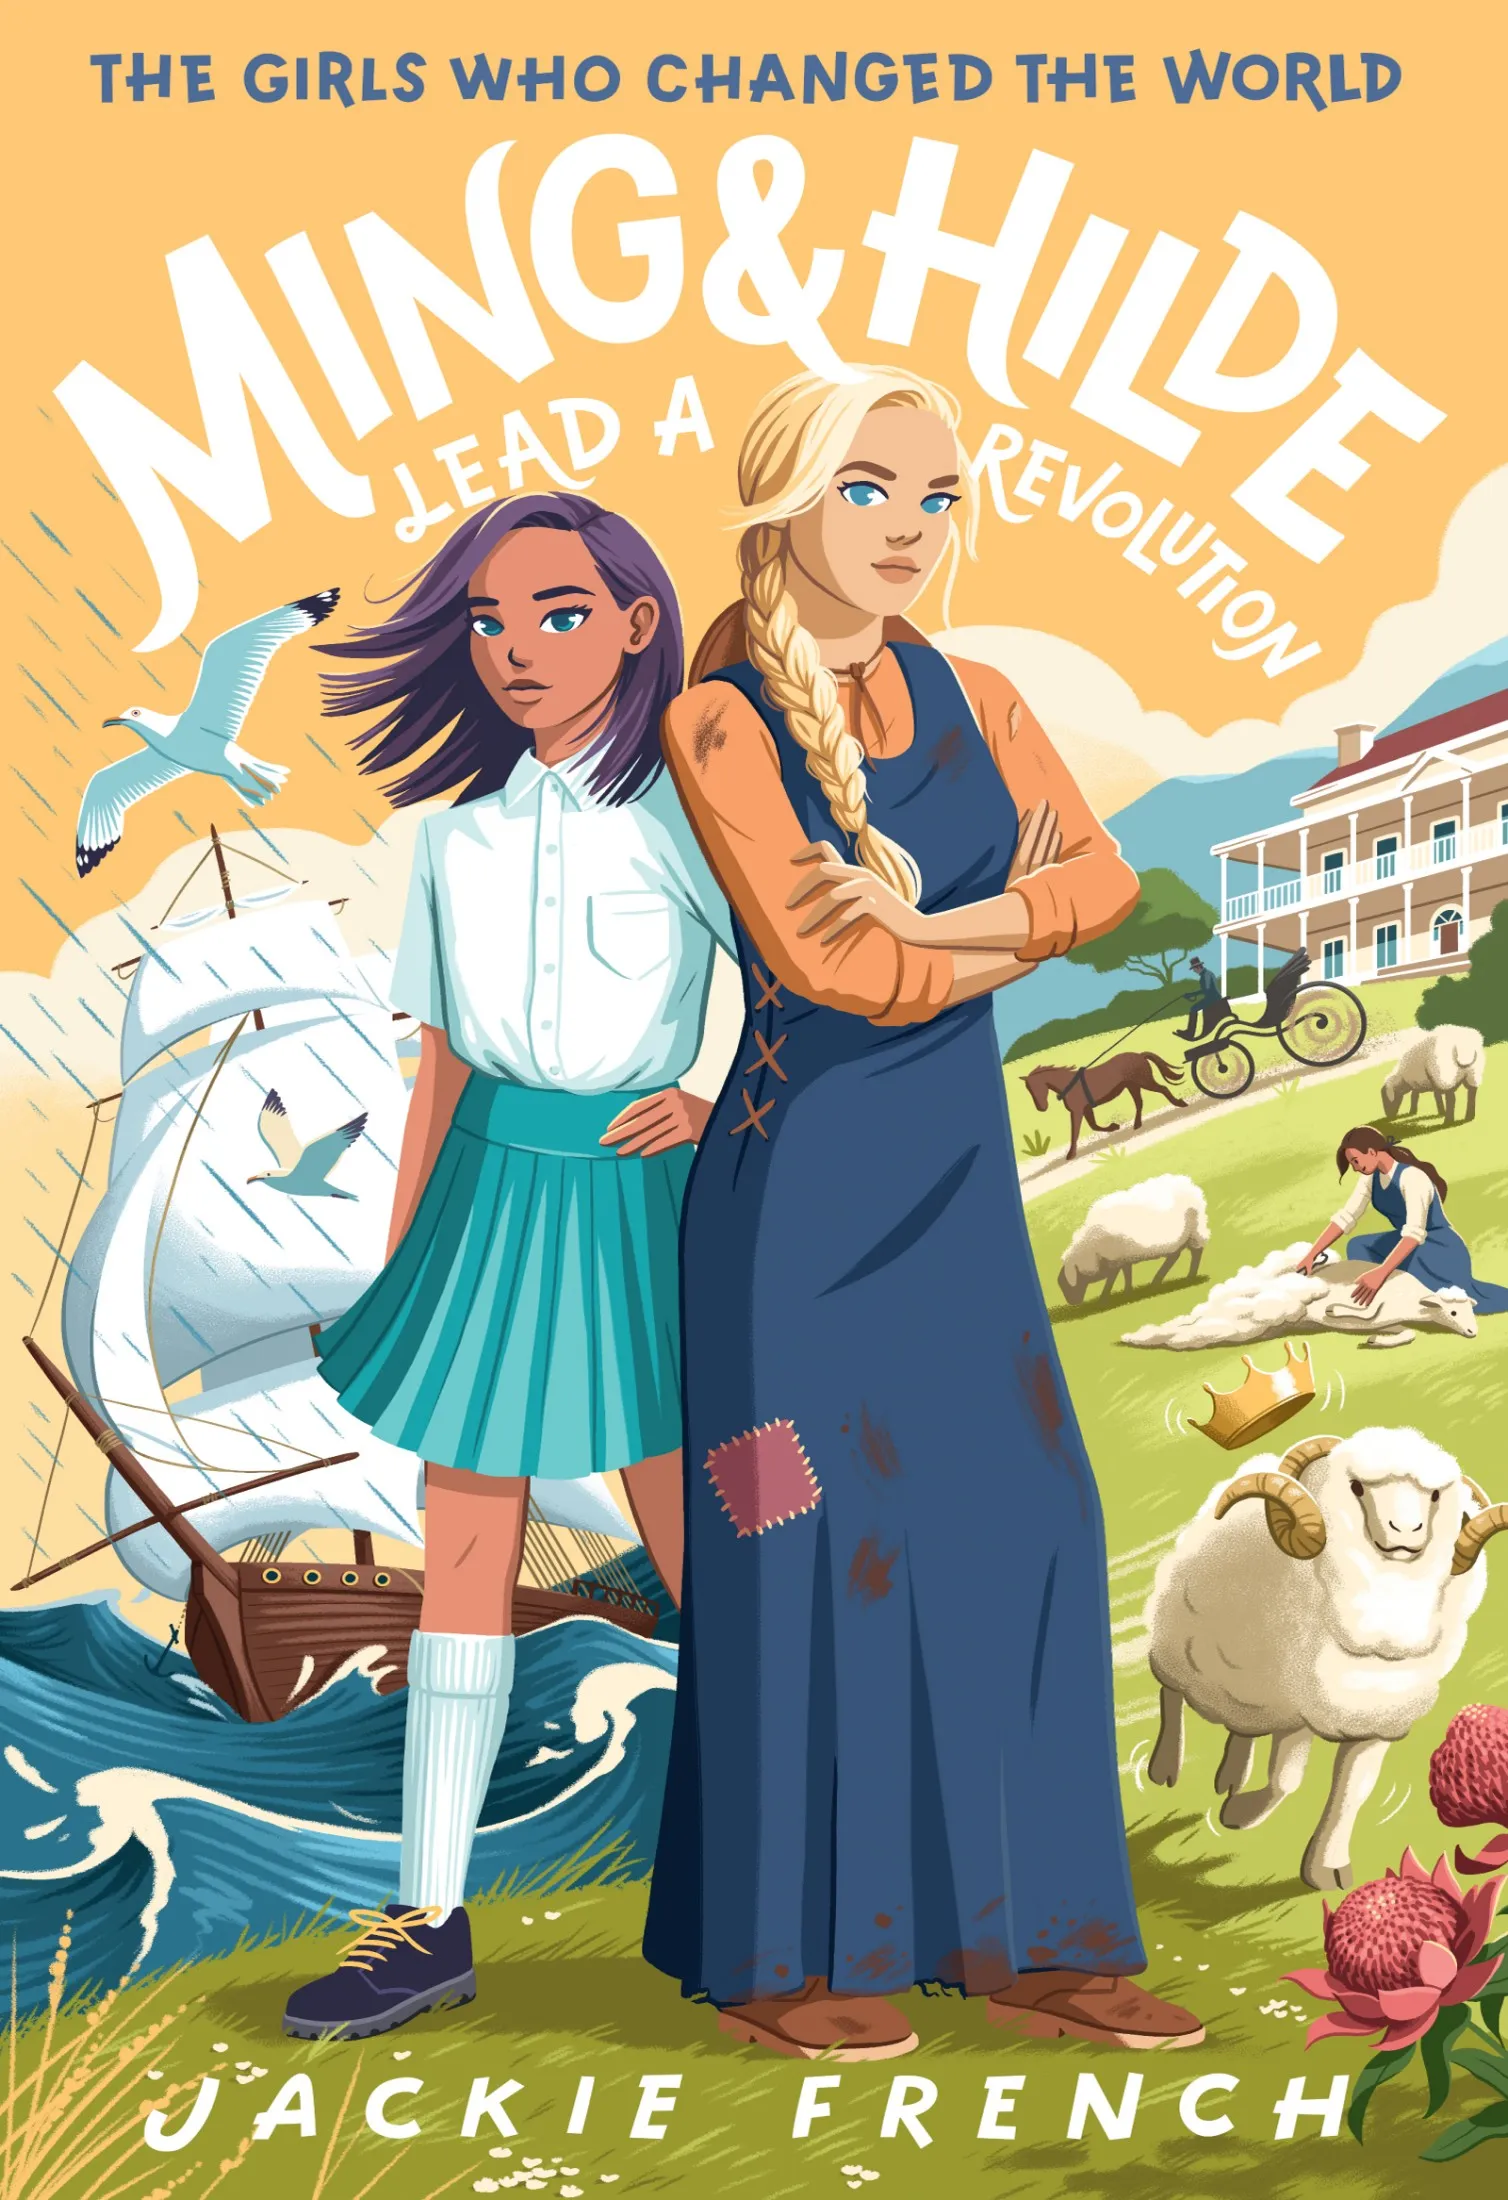 Ming and Hilde Lead a Revolution (The Girls Who Changed the World #3)